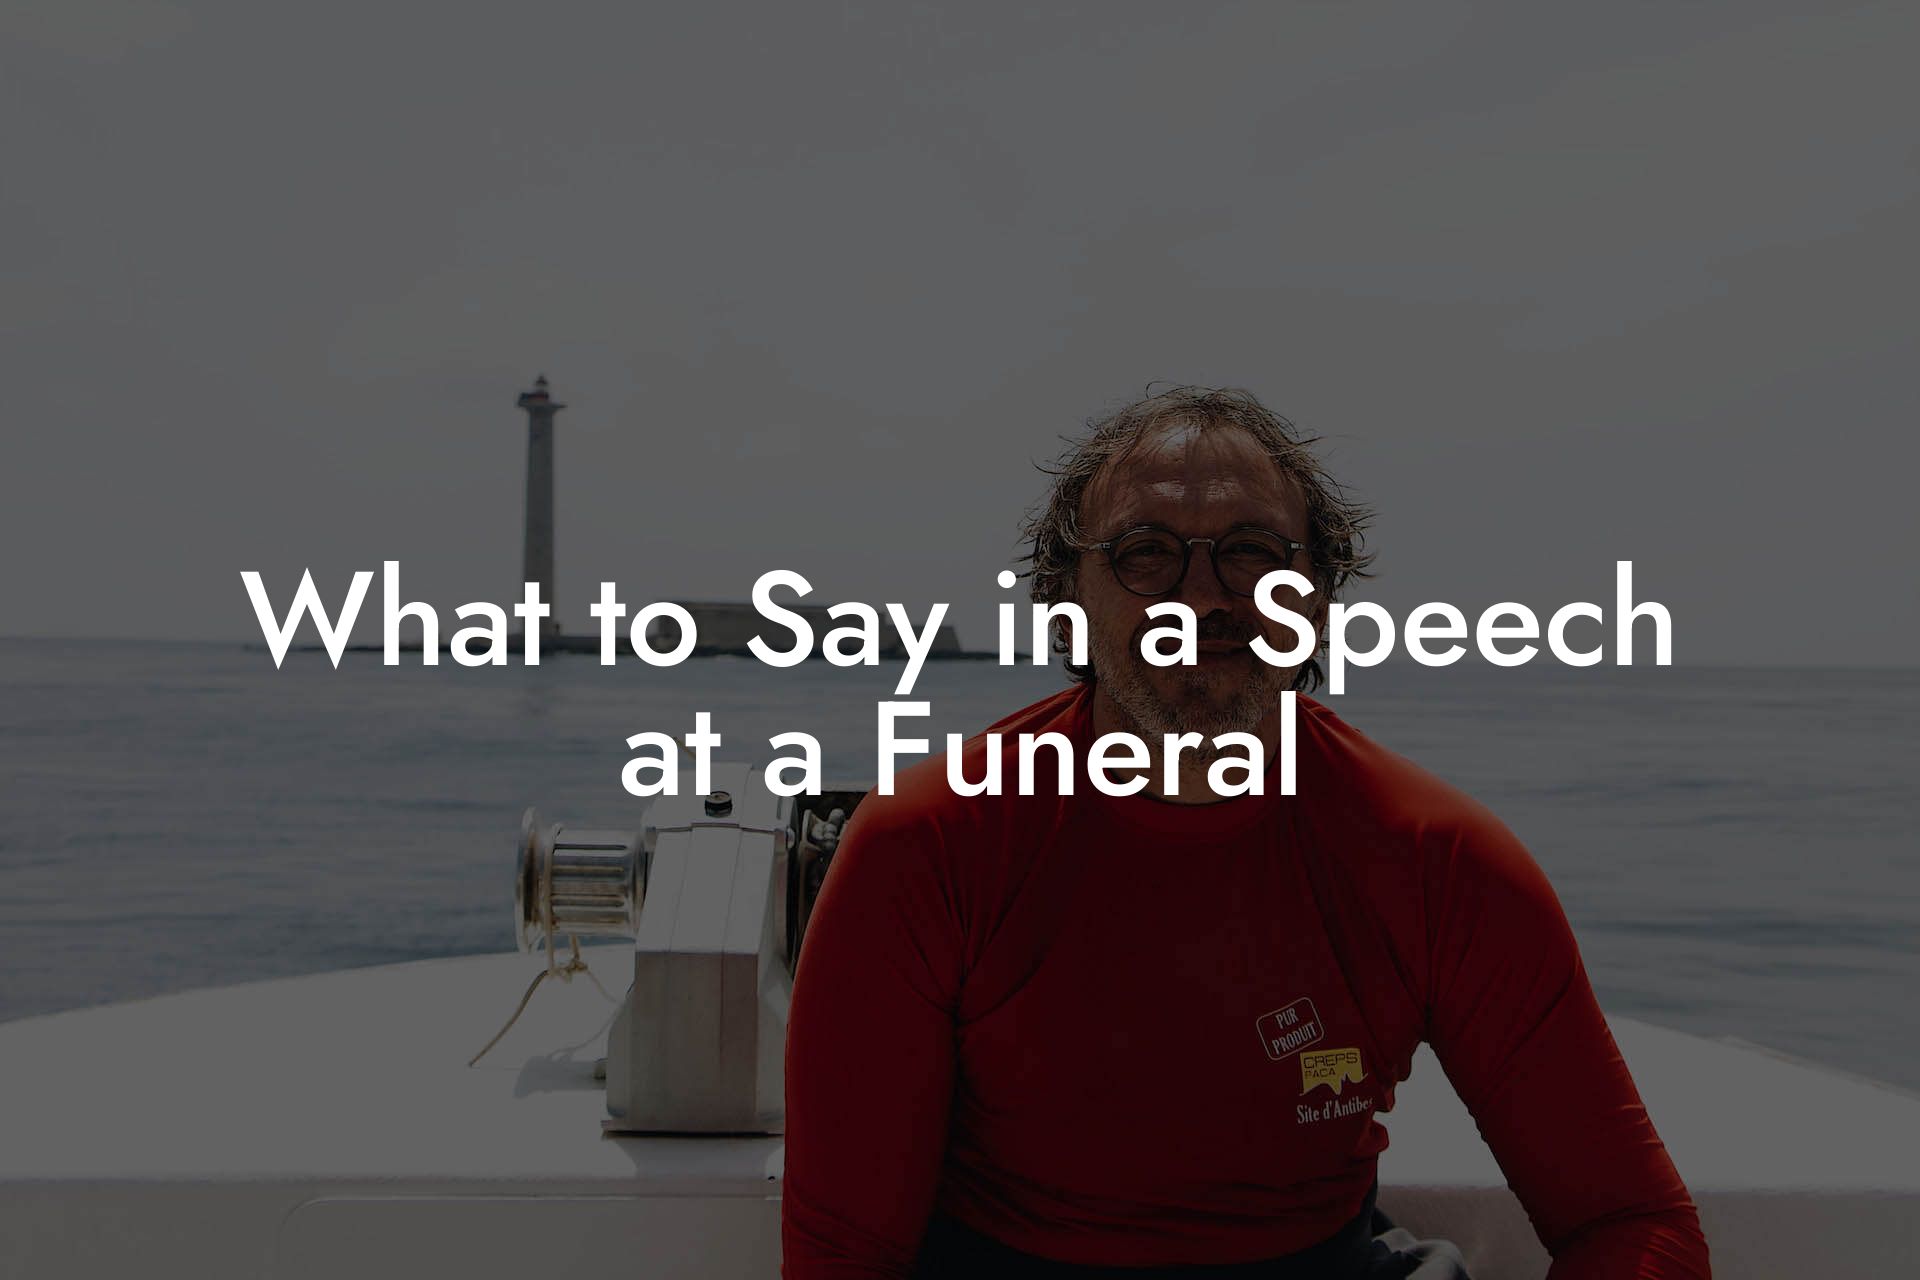 What to Say in a Speech at a Funeral